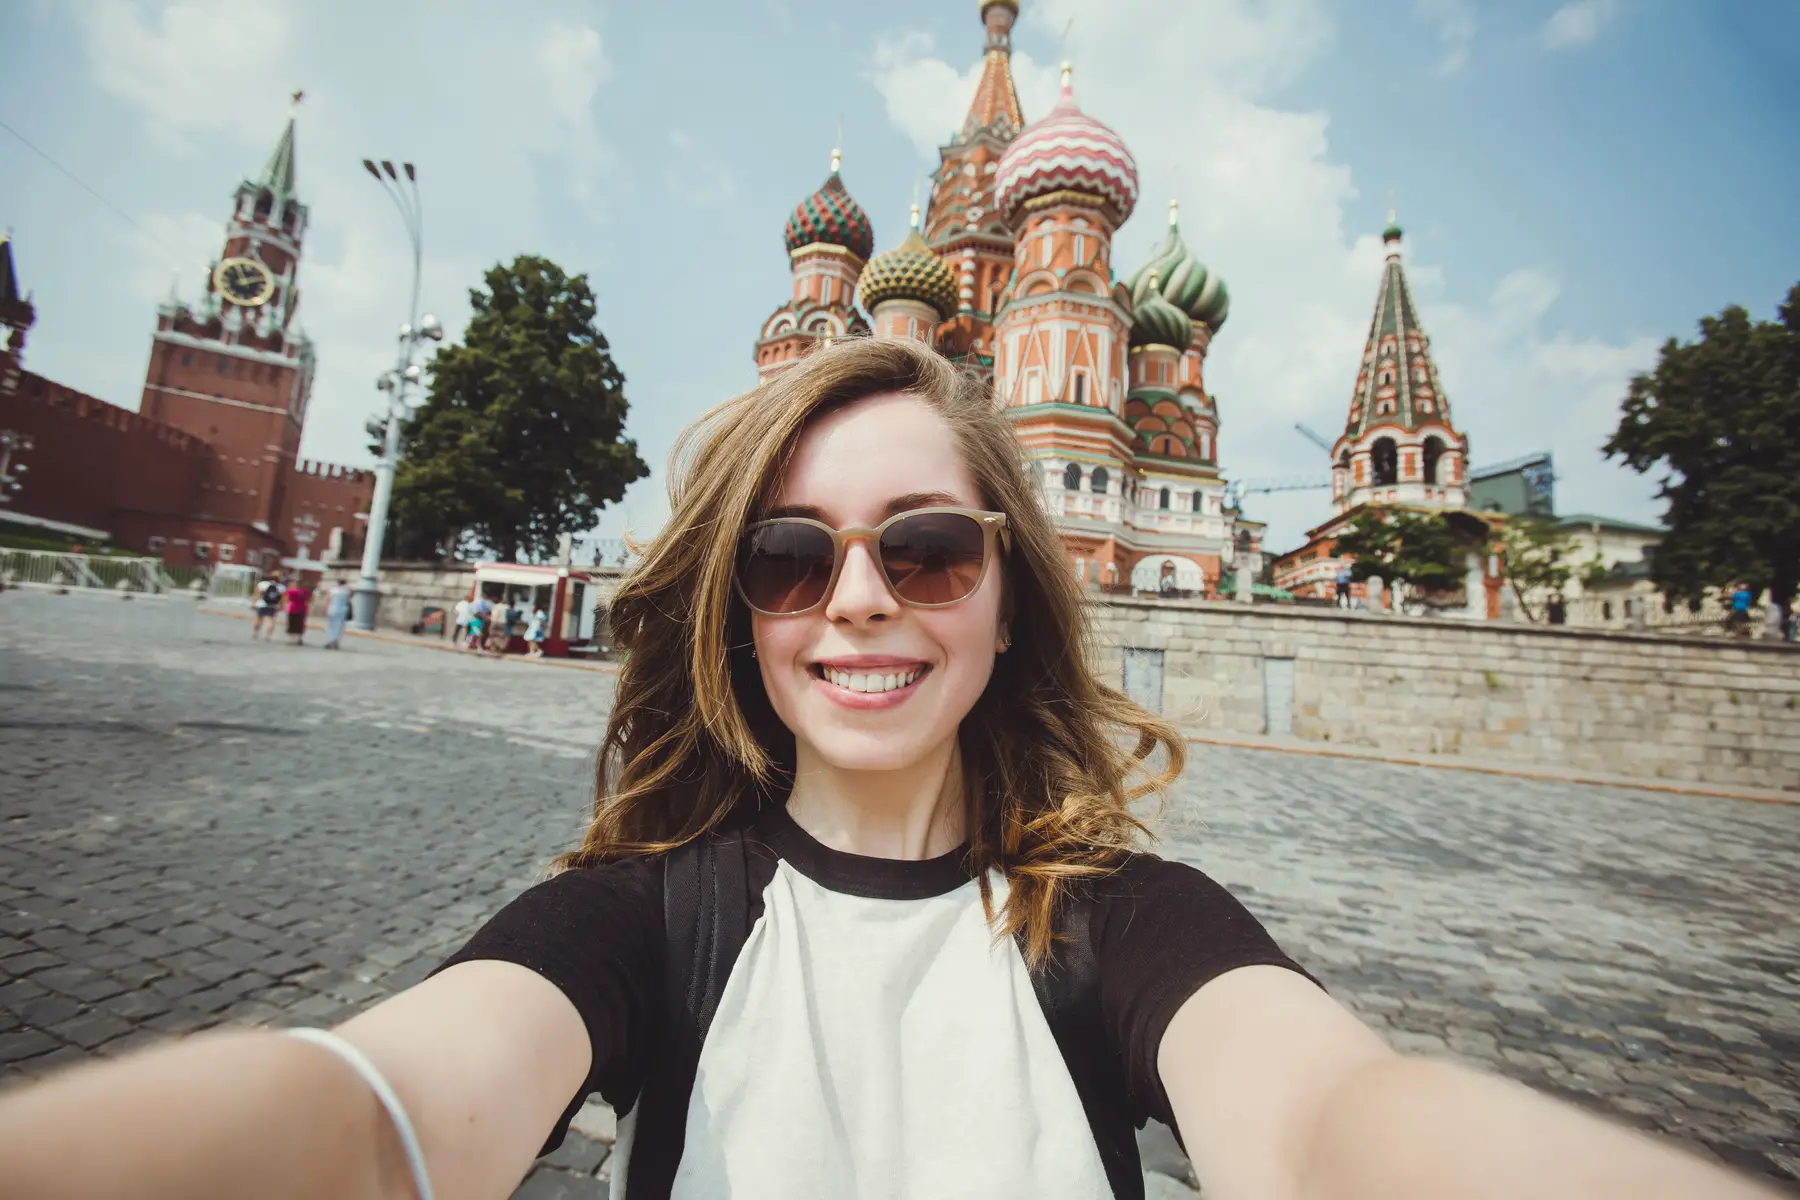 Taking a selfie on Red Square in Moscow